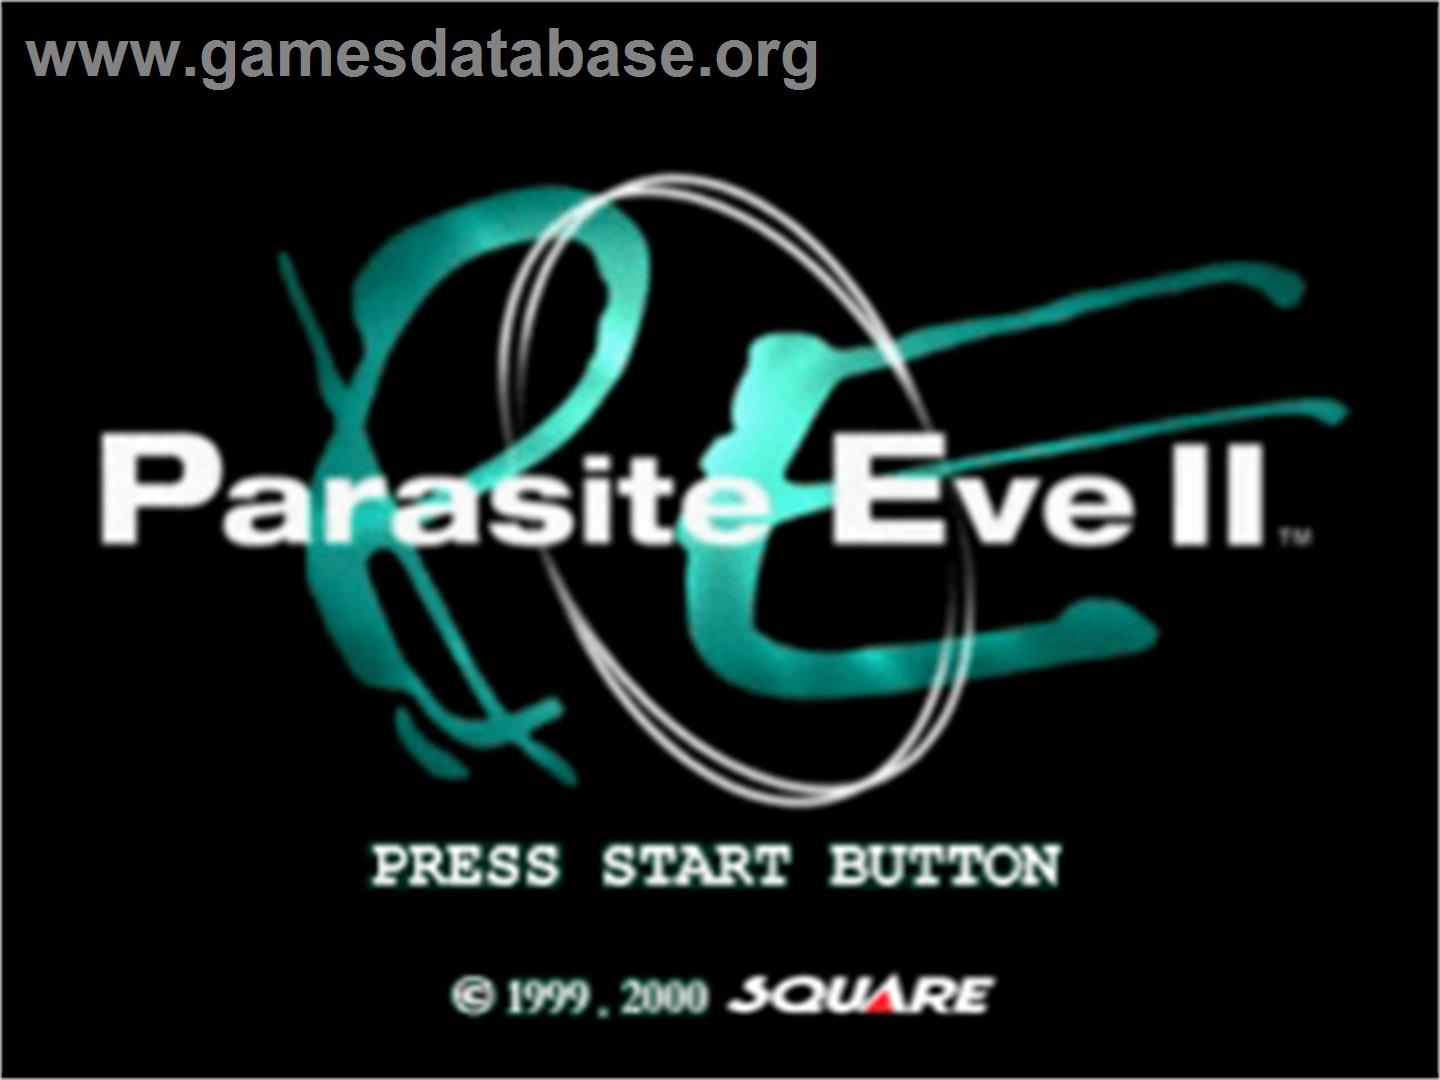 Parasite Eve II - Sony Playstation - Artwork - Title Screen